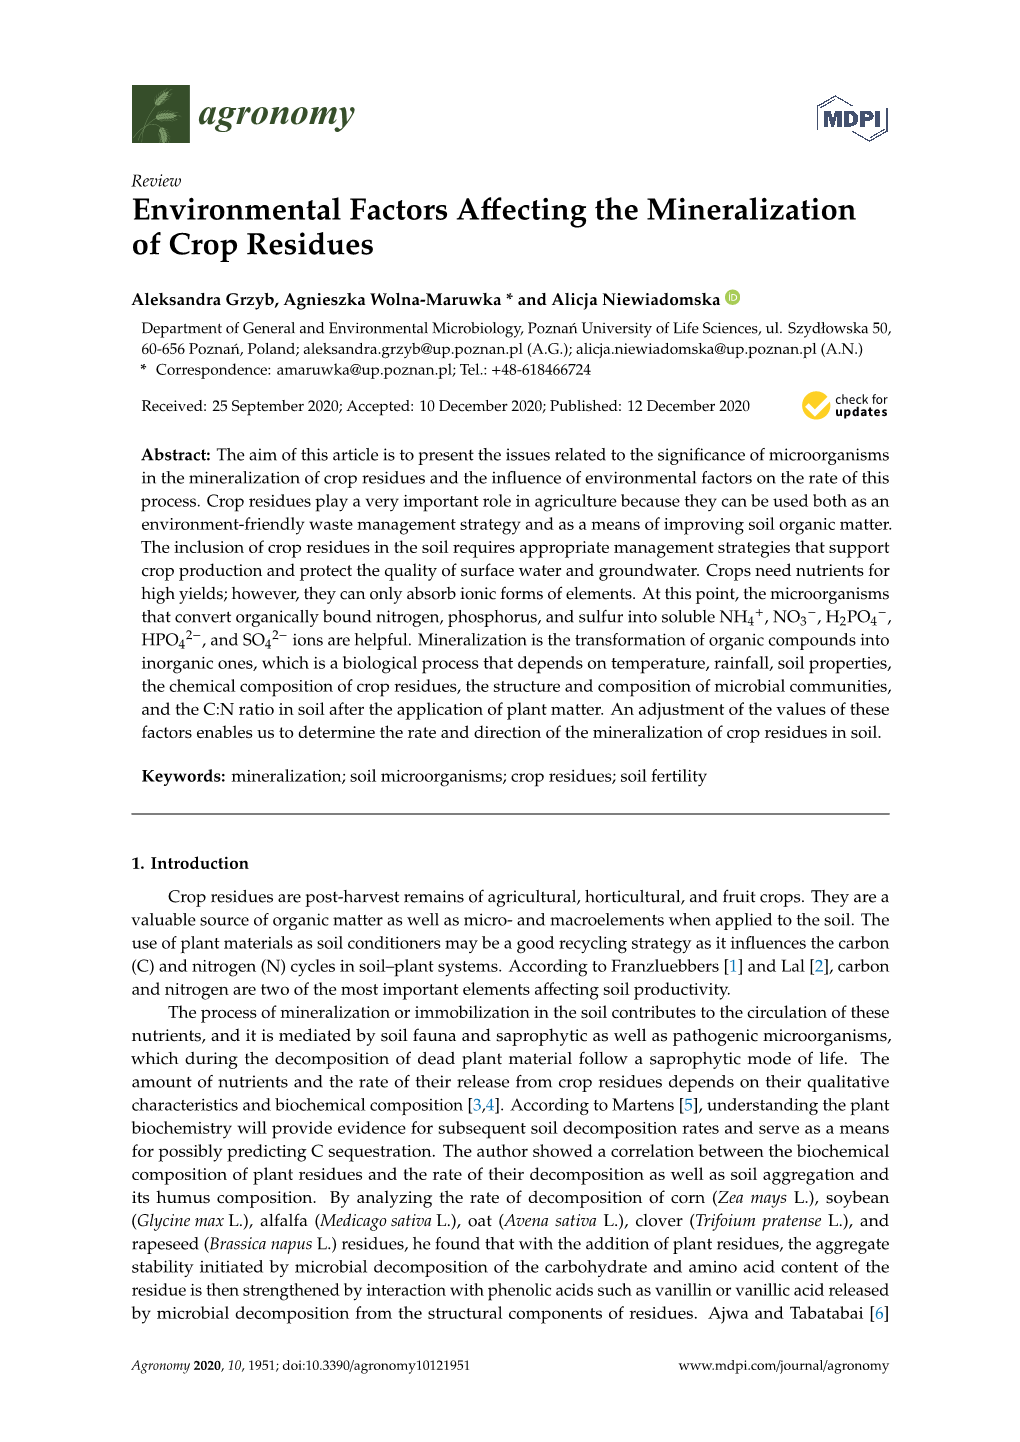 Environmental Factors Affecting the Mineralization of Crop Residues